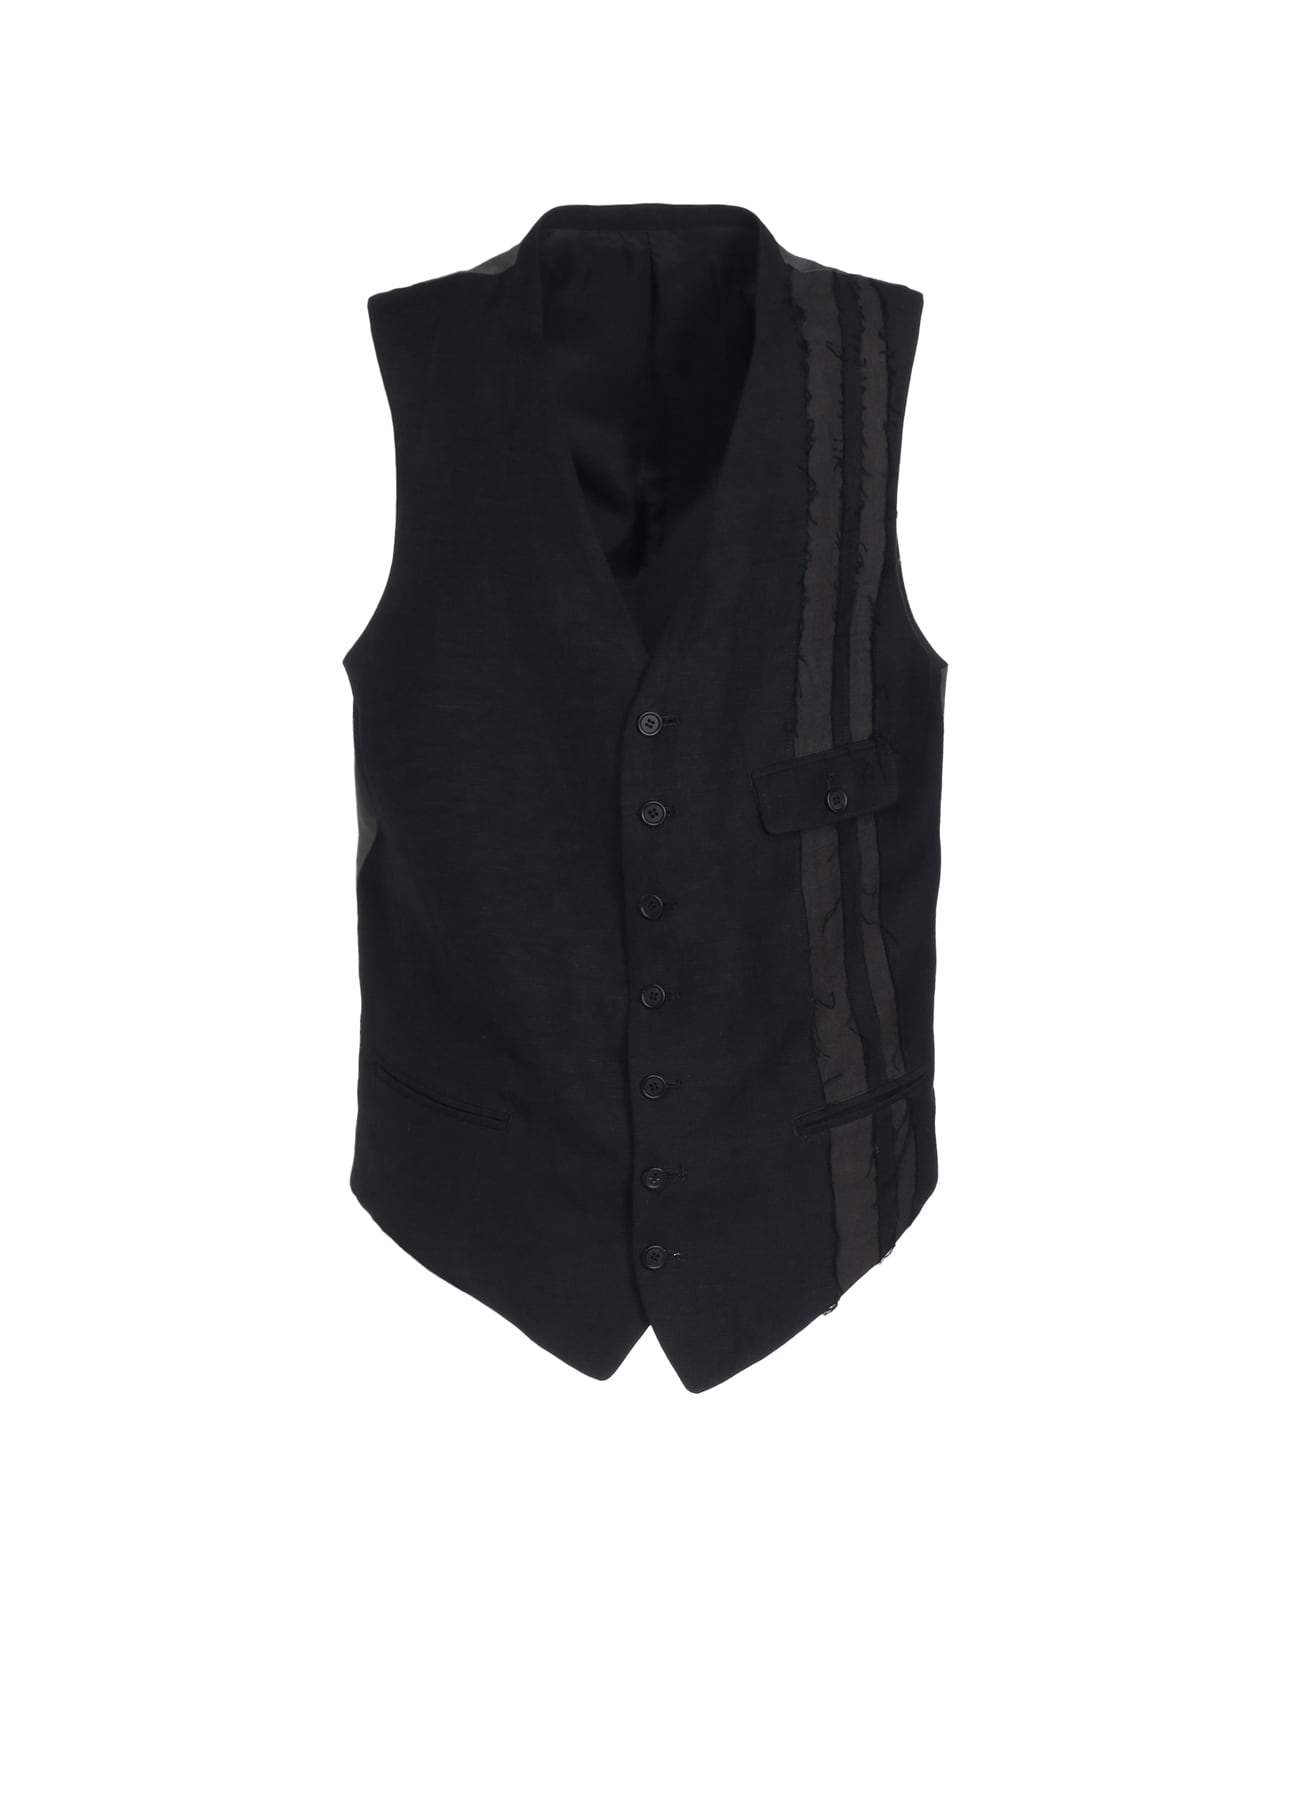 BIO-WASHED DUAL FABRIC CUTTING-EDGE VEST(M Black): S'YTE｜THE SHOP 